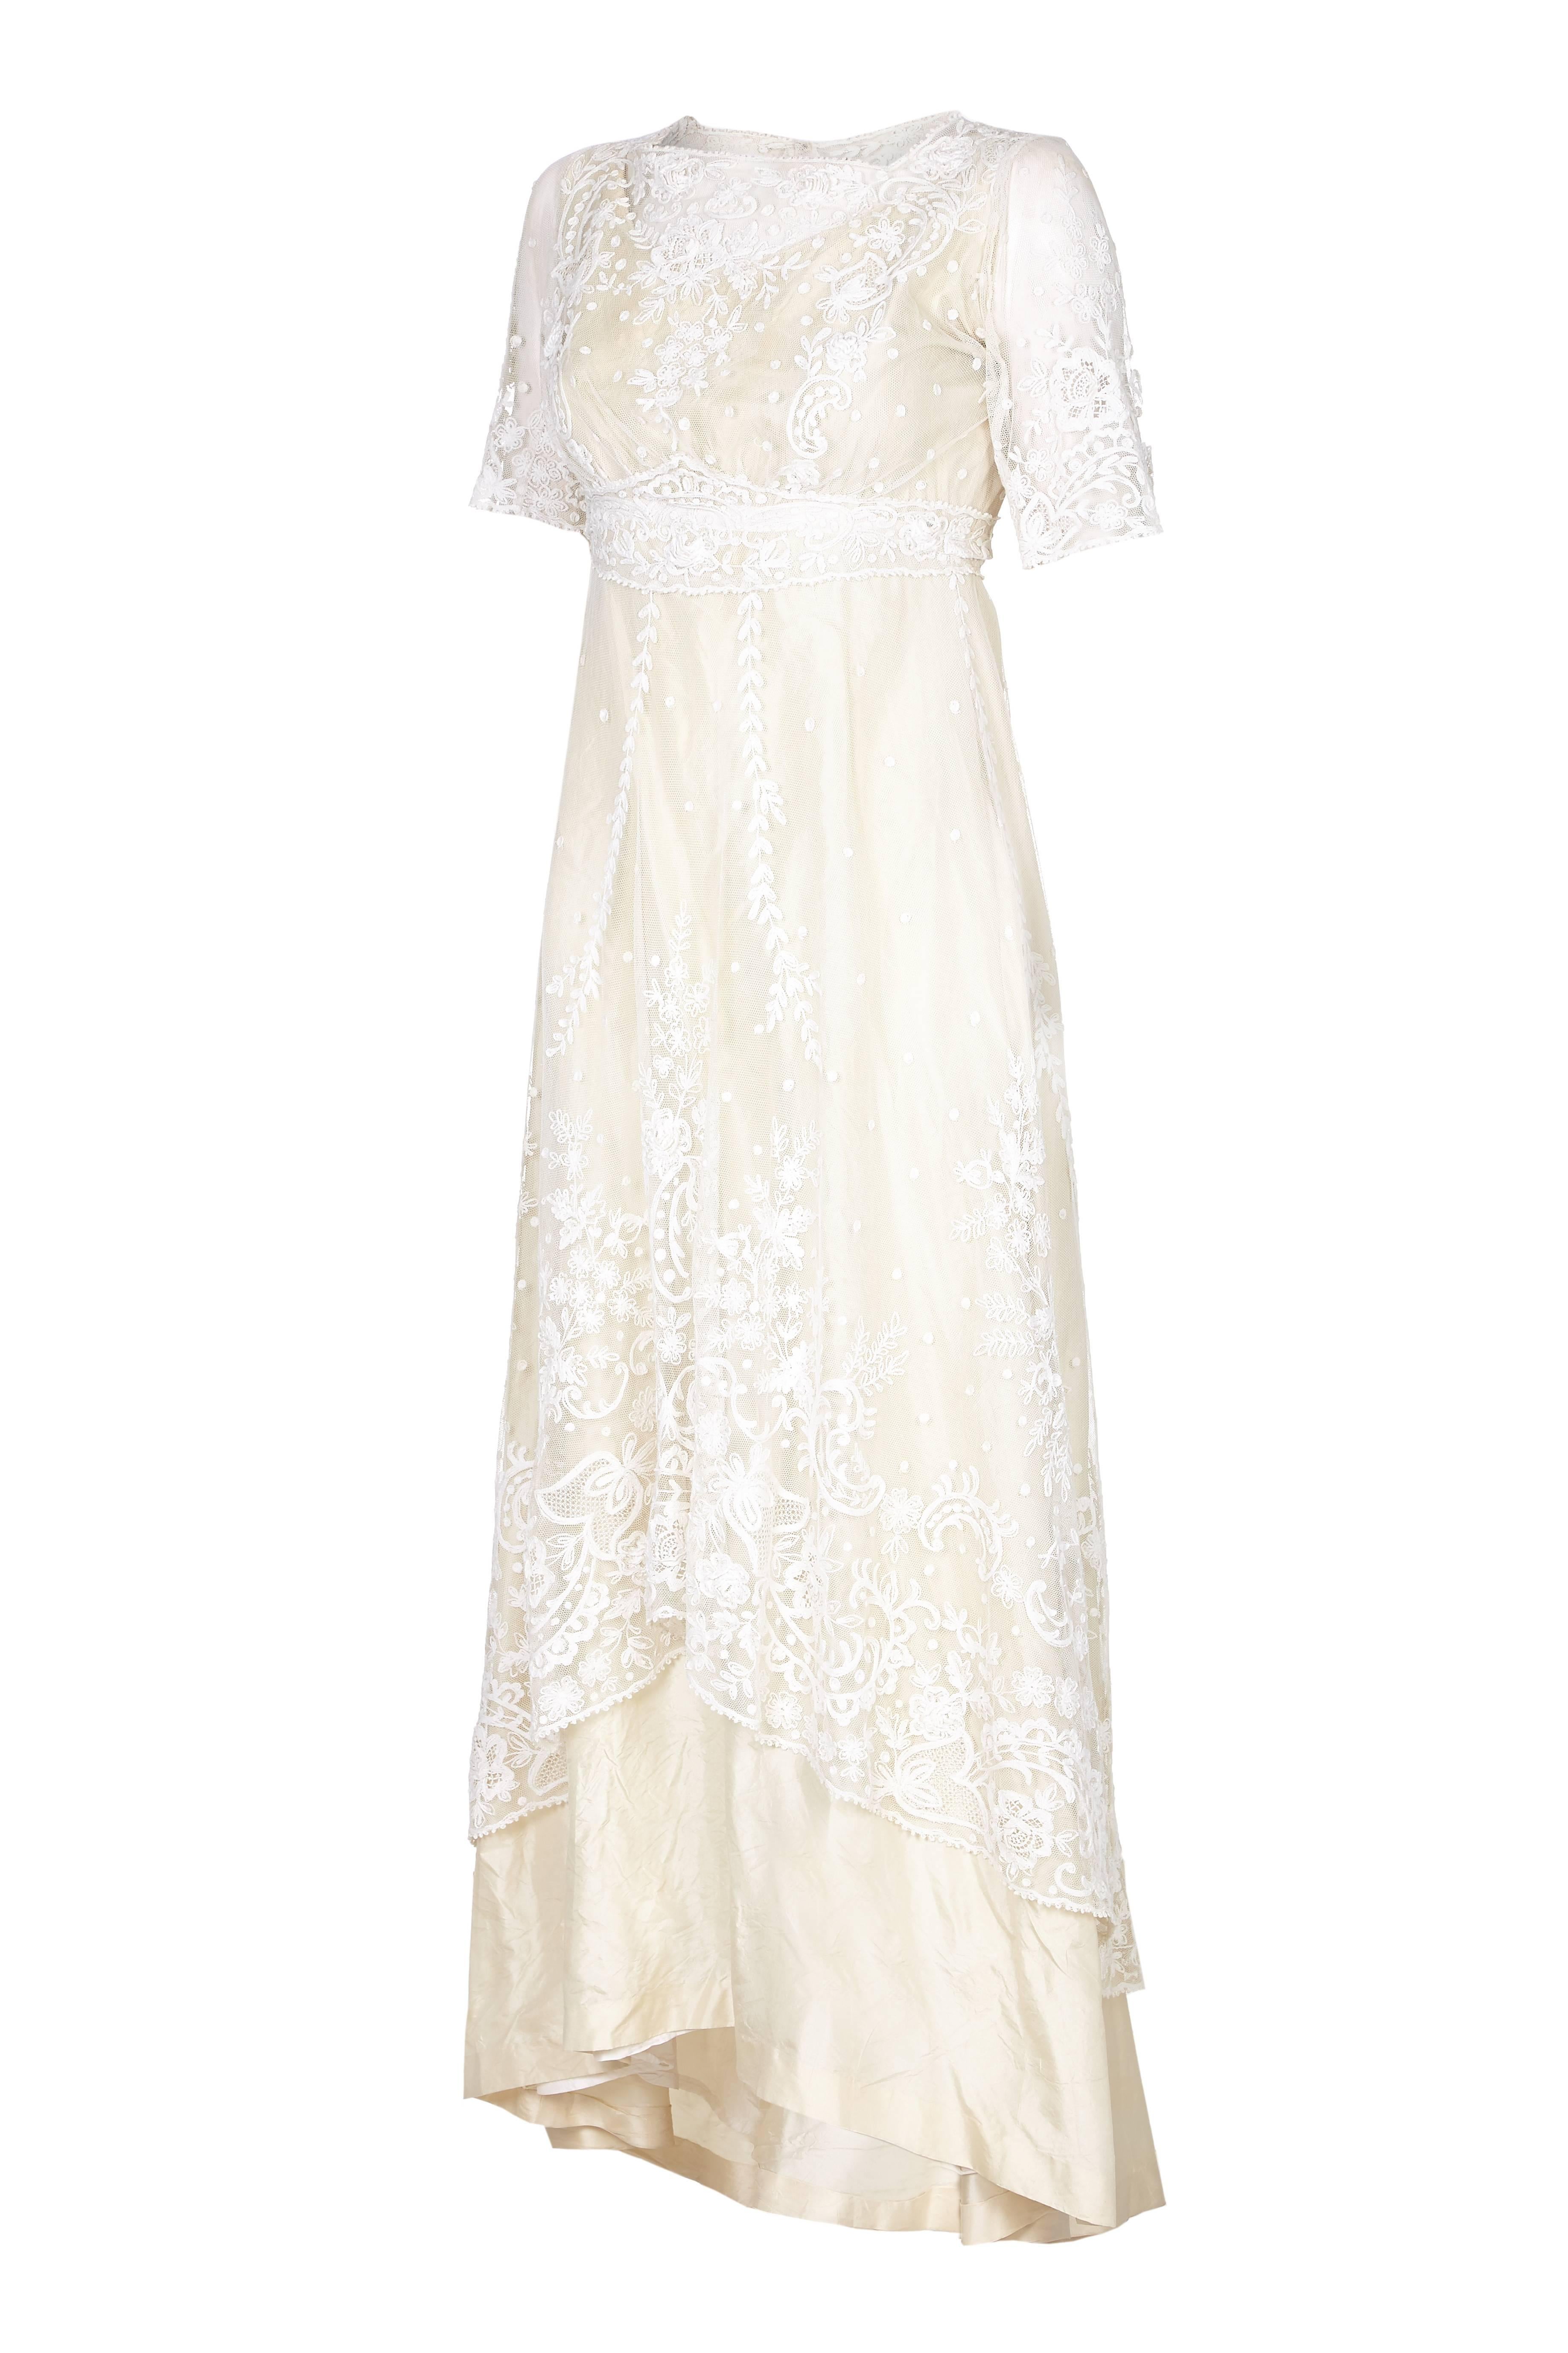 Exceptional and incredible vintage Edwardian wedding dress with amazing top layer of hand made lace featuring floral designs.  The lace looks to be Brussels and/or tambour lace applied to machine-made net and both bobbin and needle lace motifs.